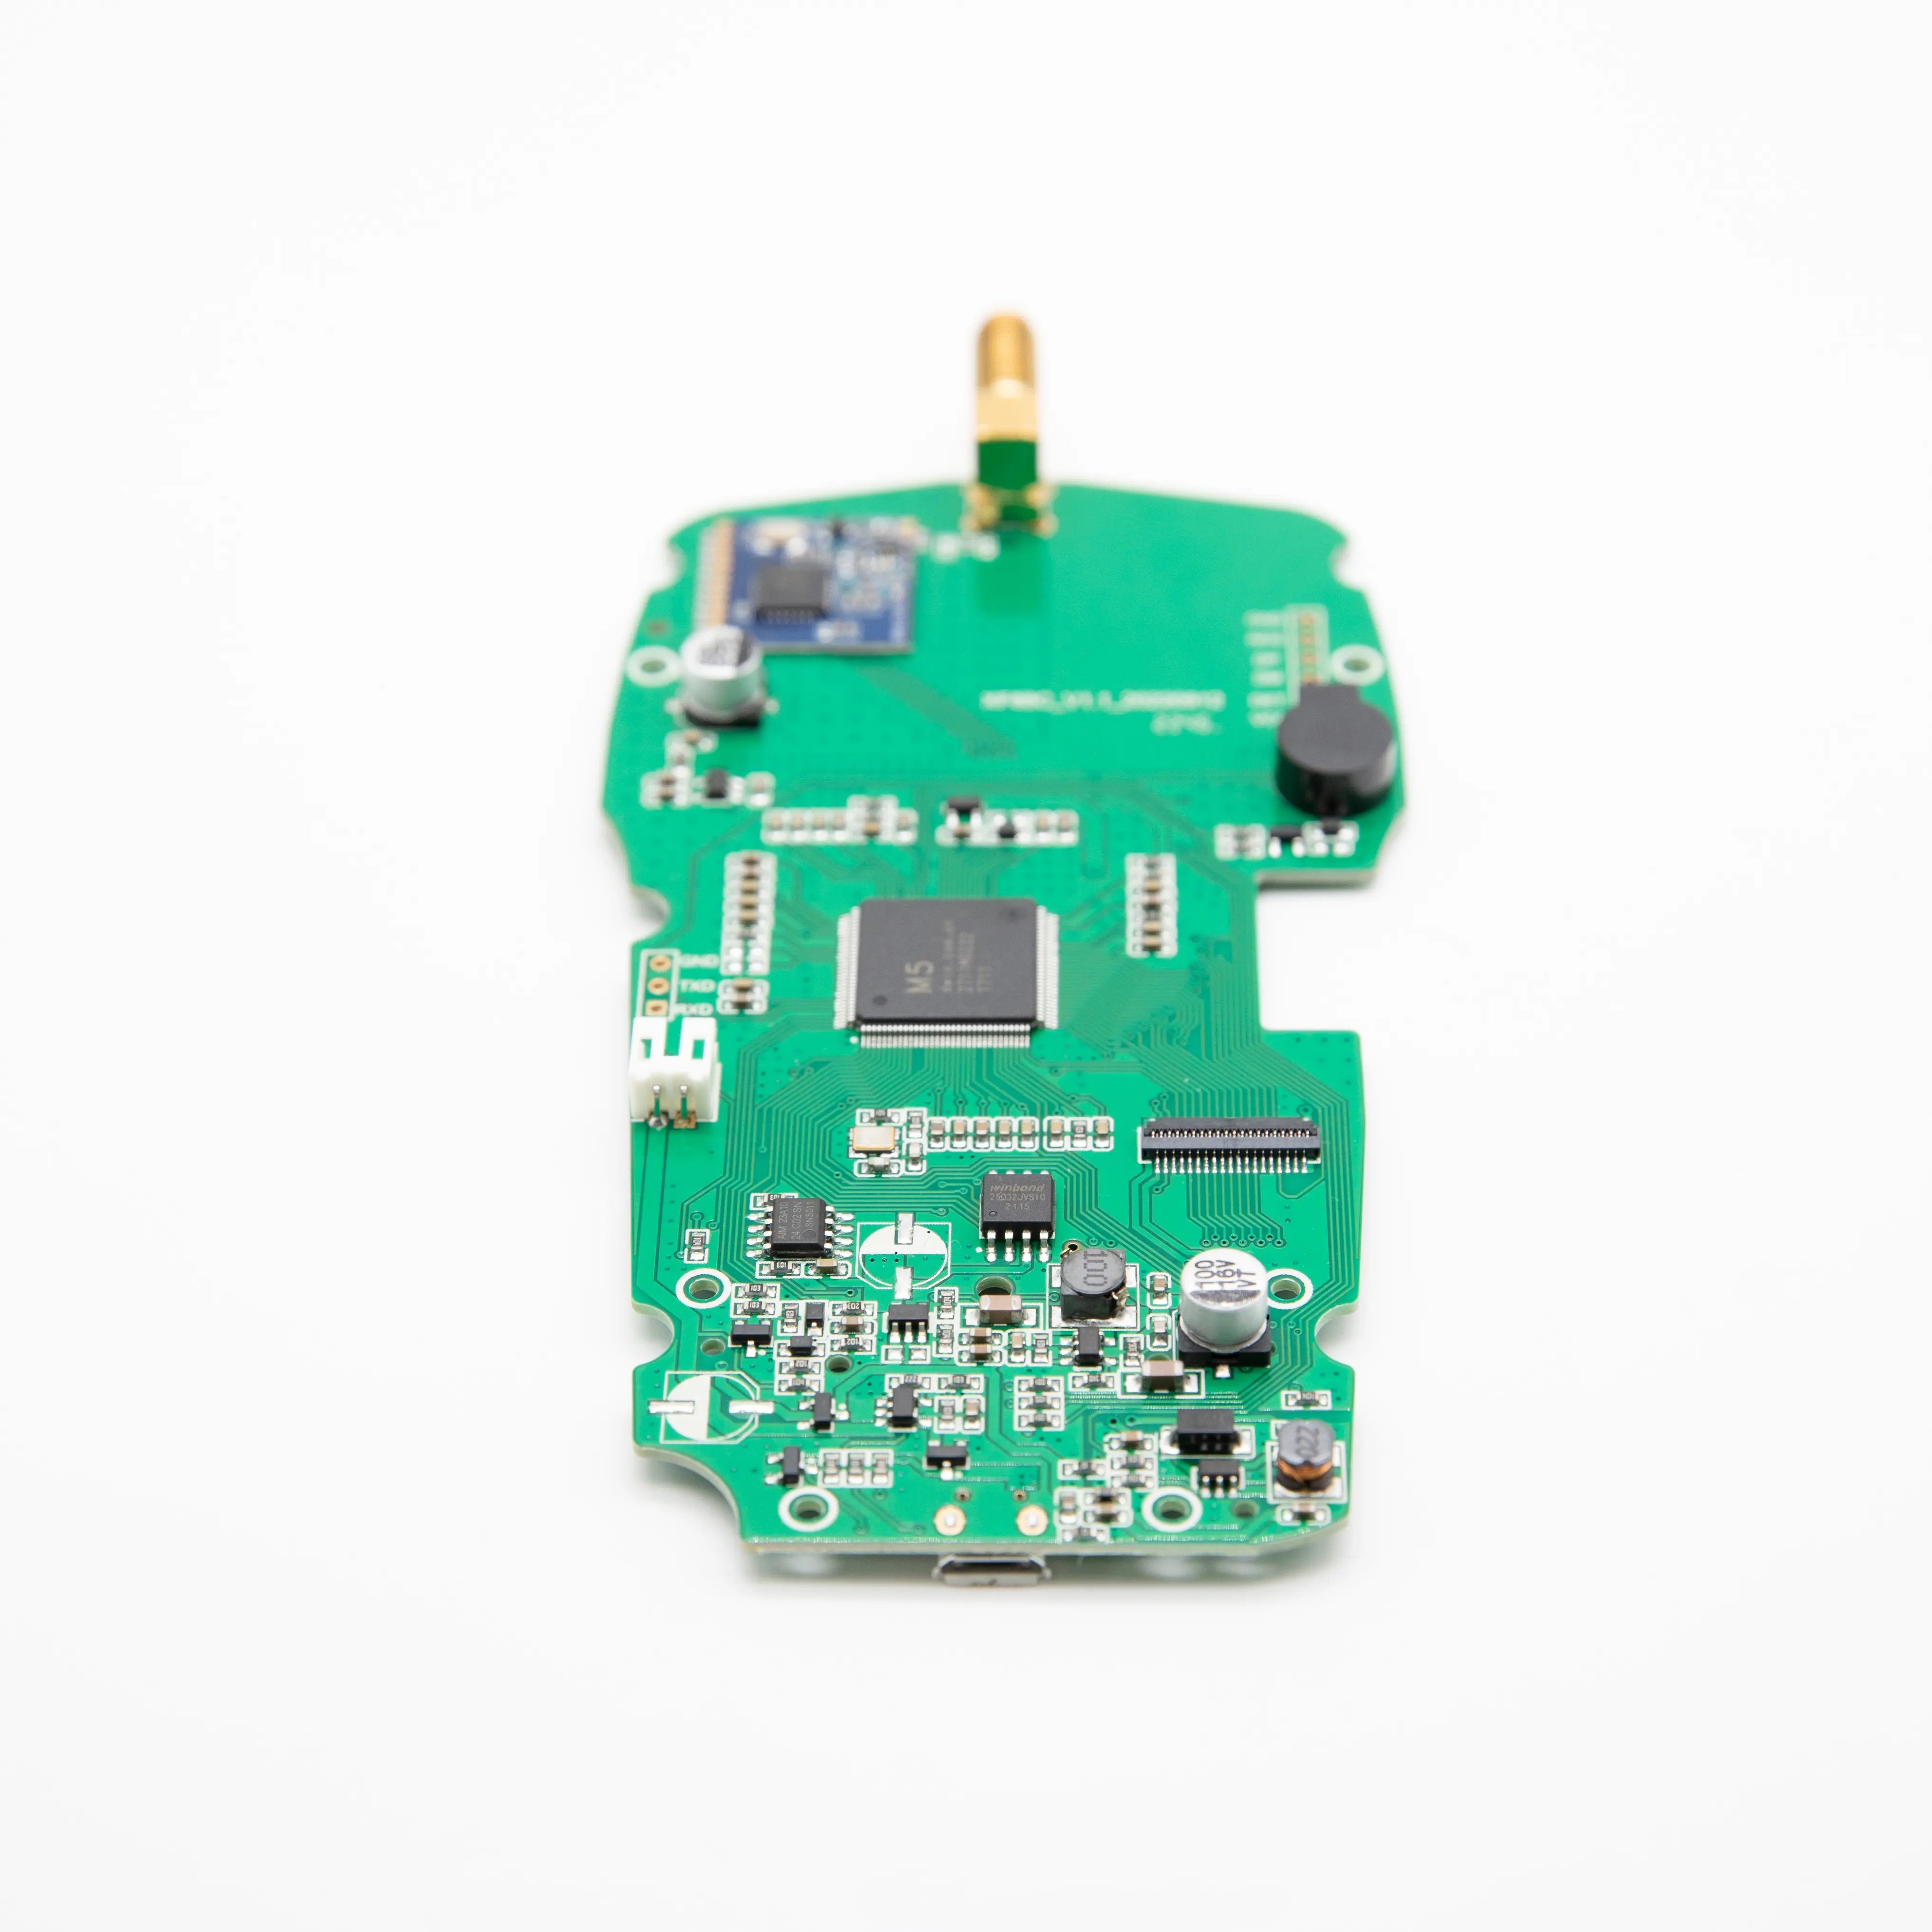 Manufacture OEM/ODM PCB PCBA Factory In China Wireless Bluetooth Audio PCB PCBA Circuit Boards Electronic Circuit Design